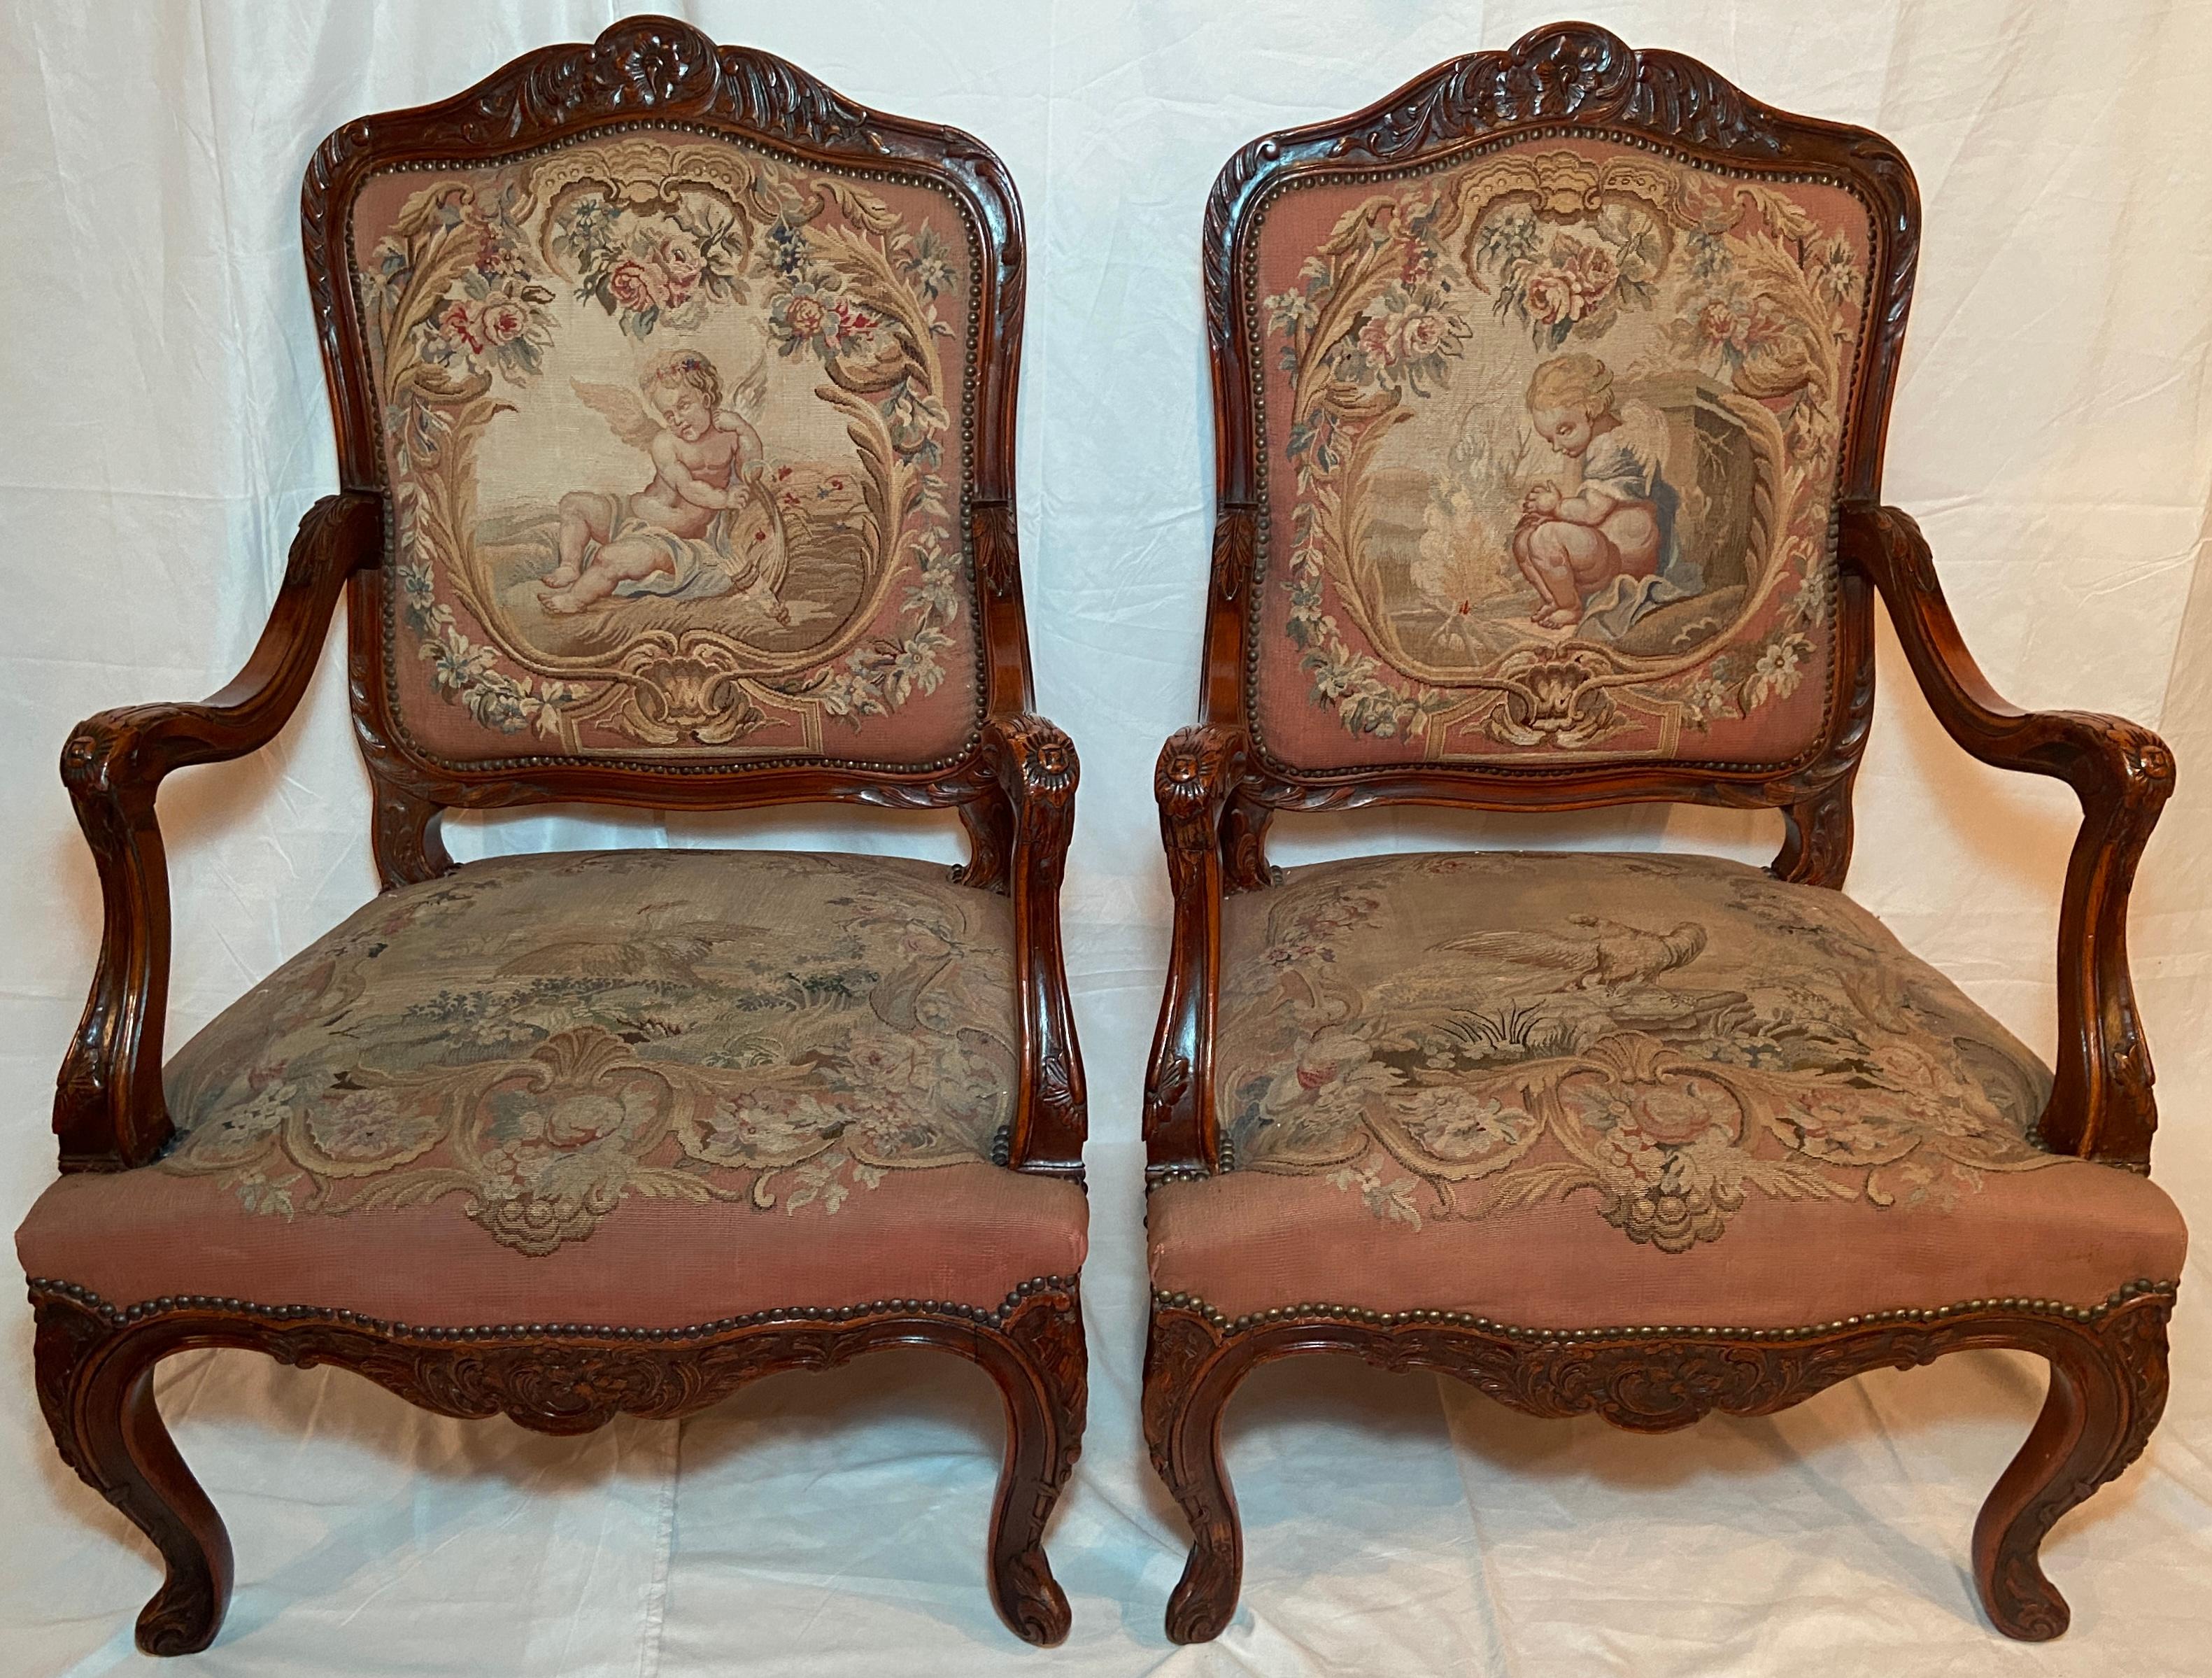 Pair Antique French walnut needlepoint armchairs, circa 1860-1870.